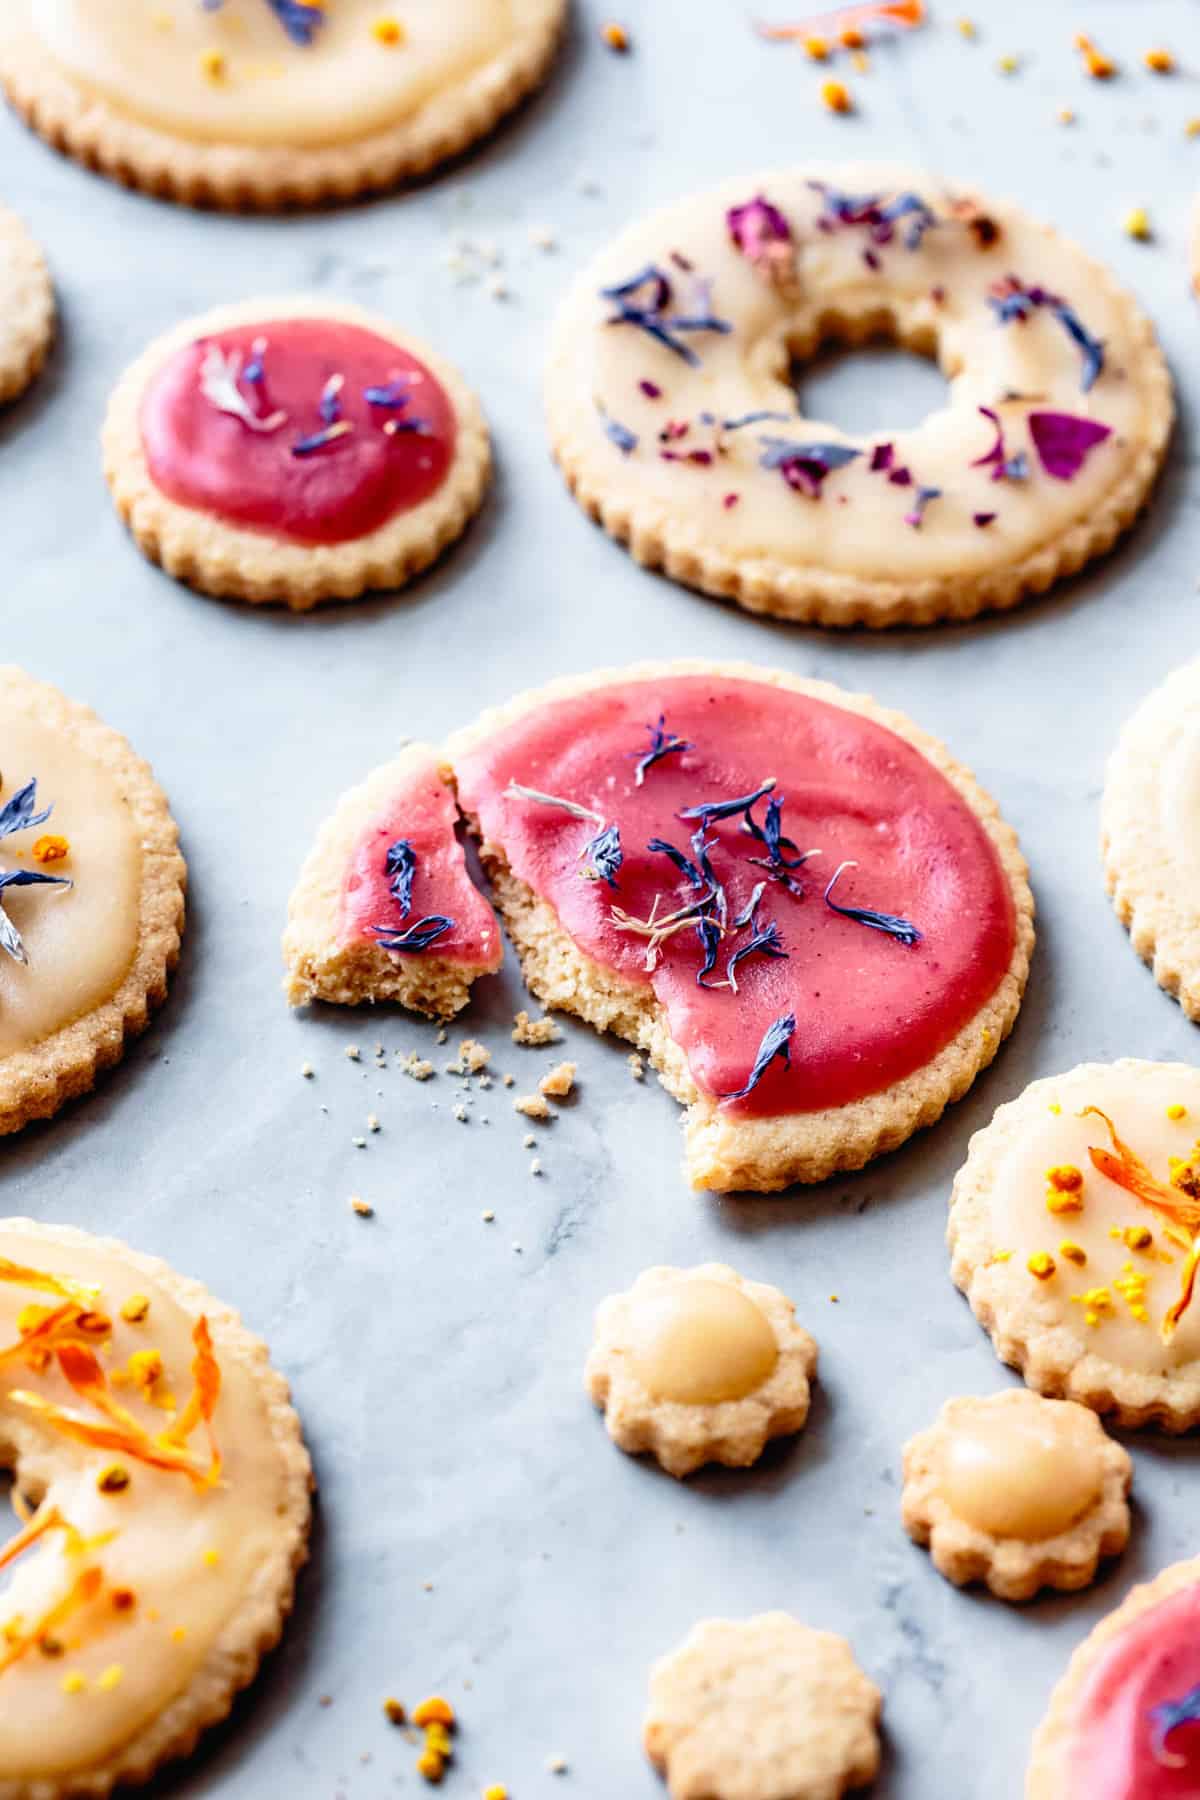 Sugar cookies topped with coconut butter glaze and dried flower petals